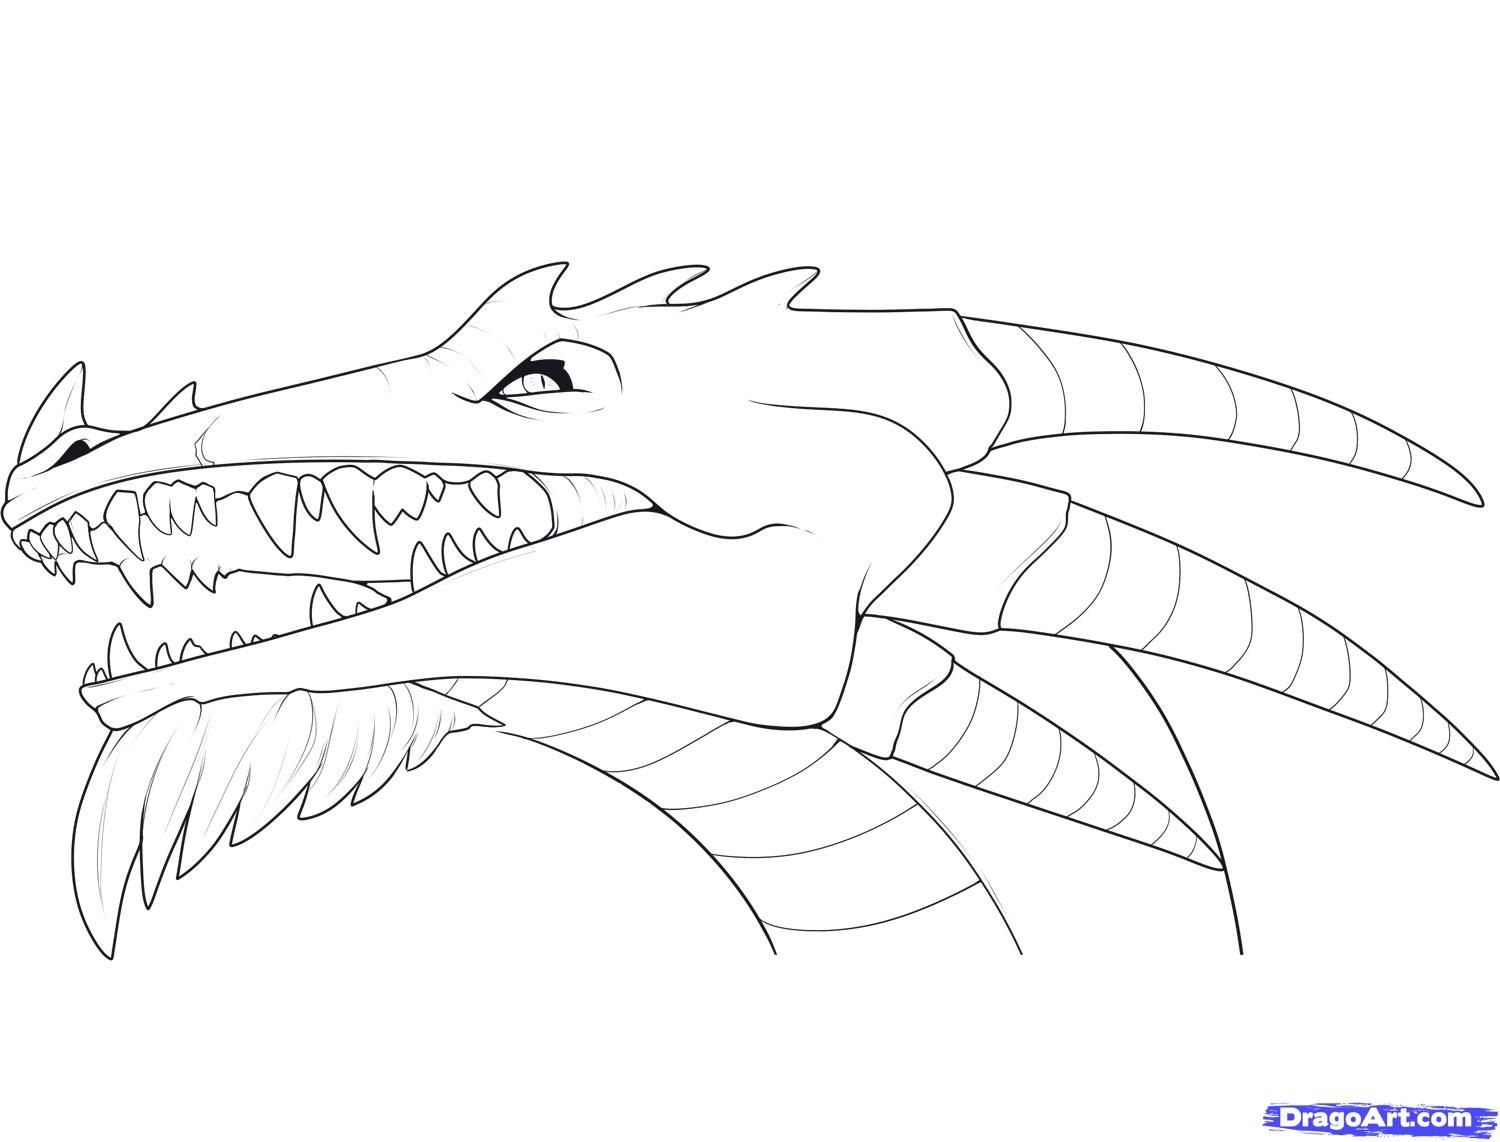 Featured image of post Dragoart How To Draw A Dragon Head If you want to draw a more detailed dragon you can use the tricks we showed to get the pose right then add your